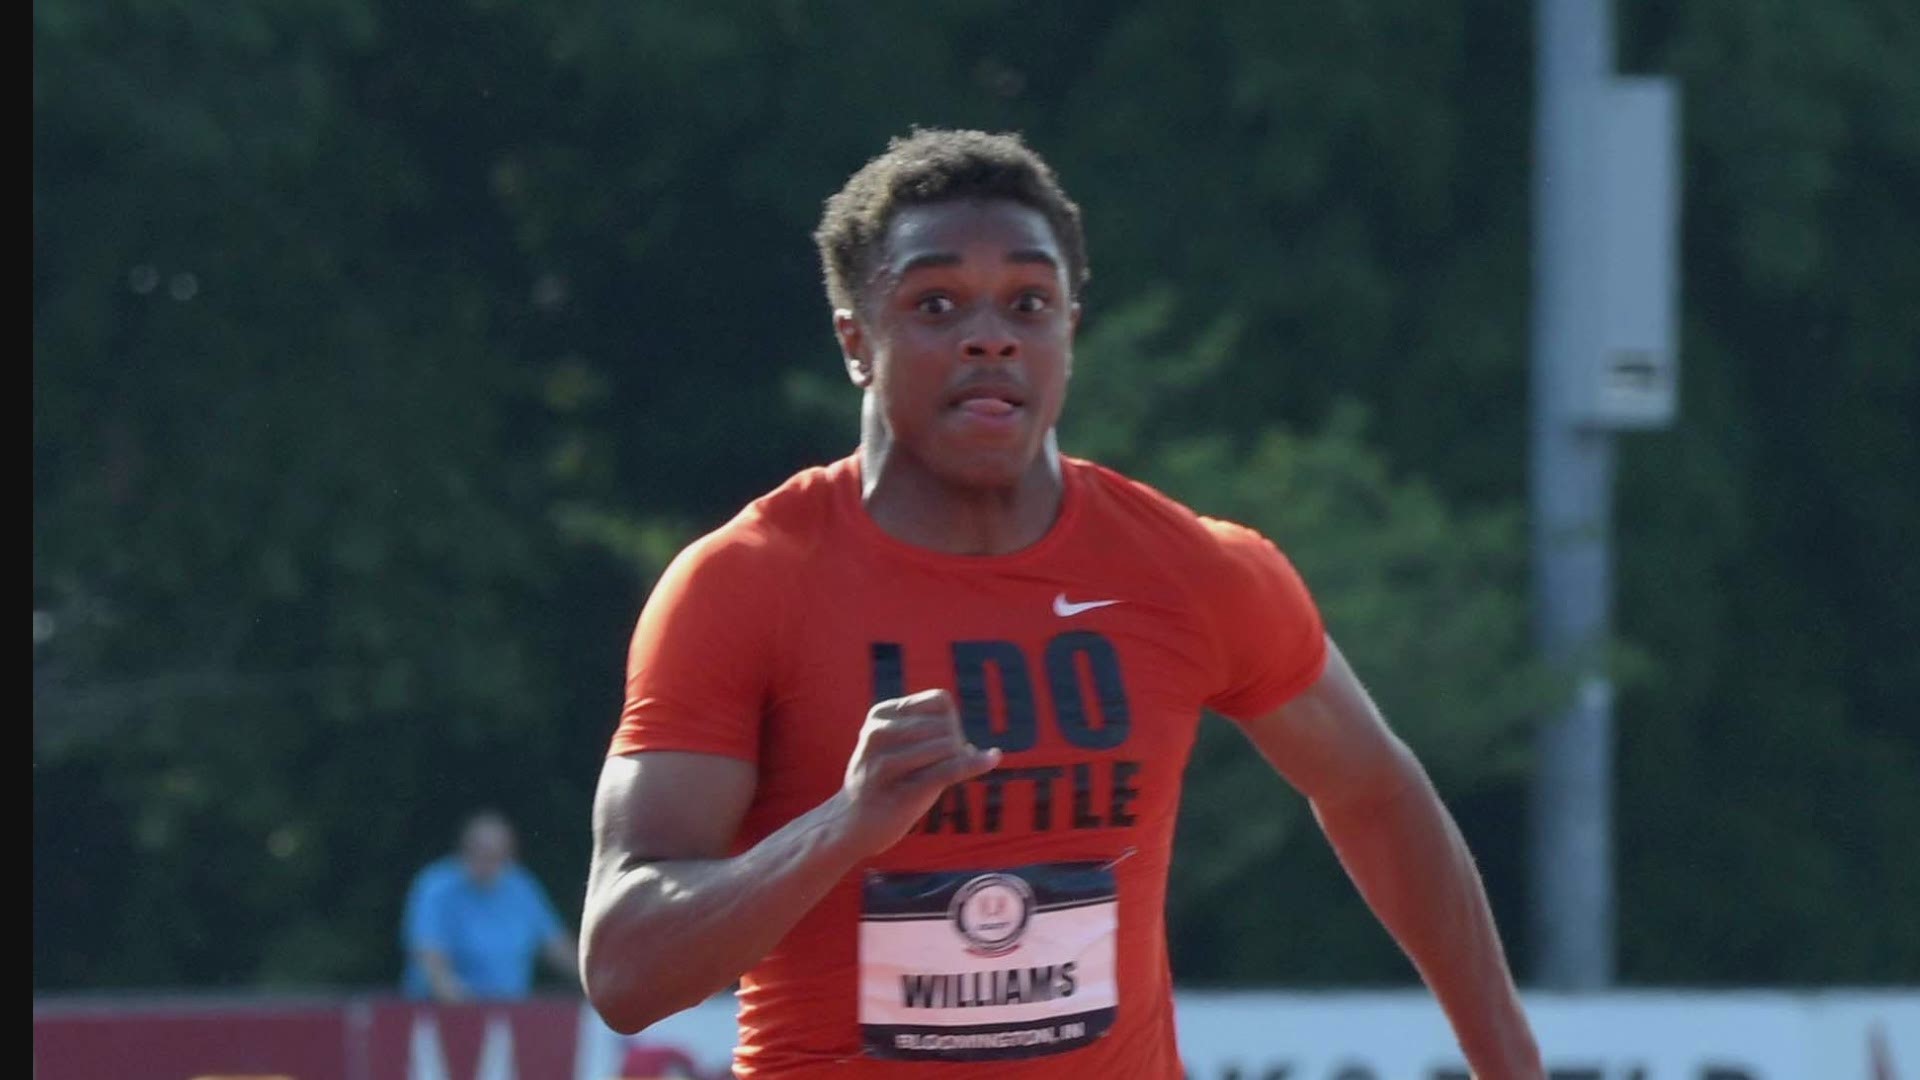 A Benson HS sprinter is heading to a big stage